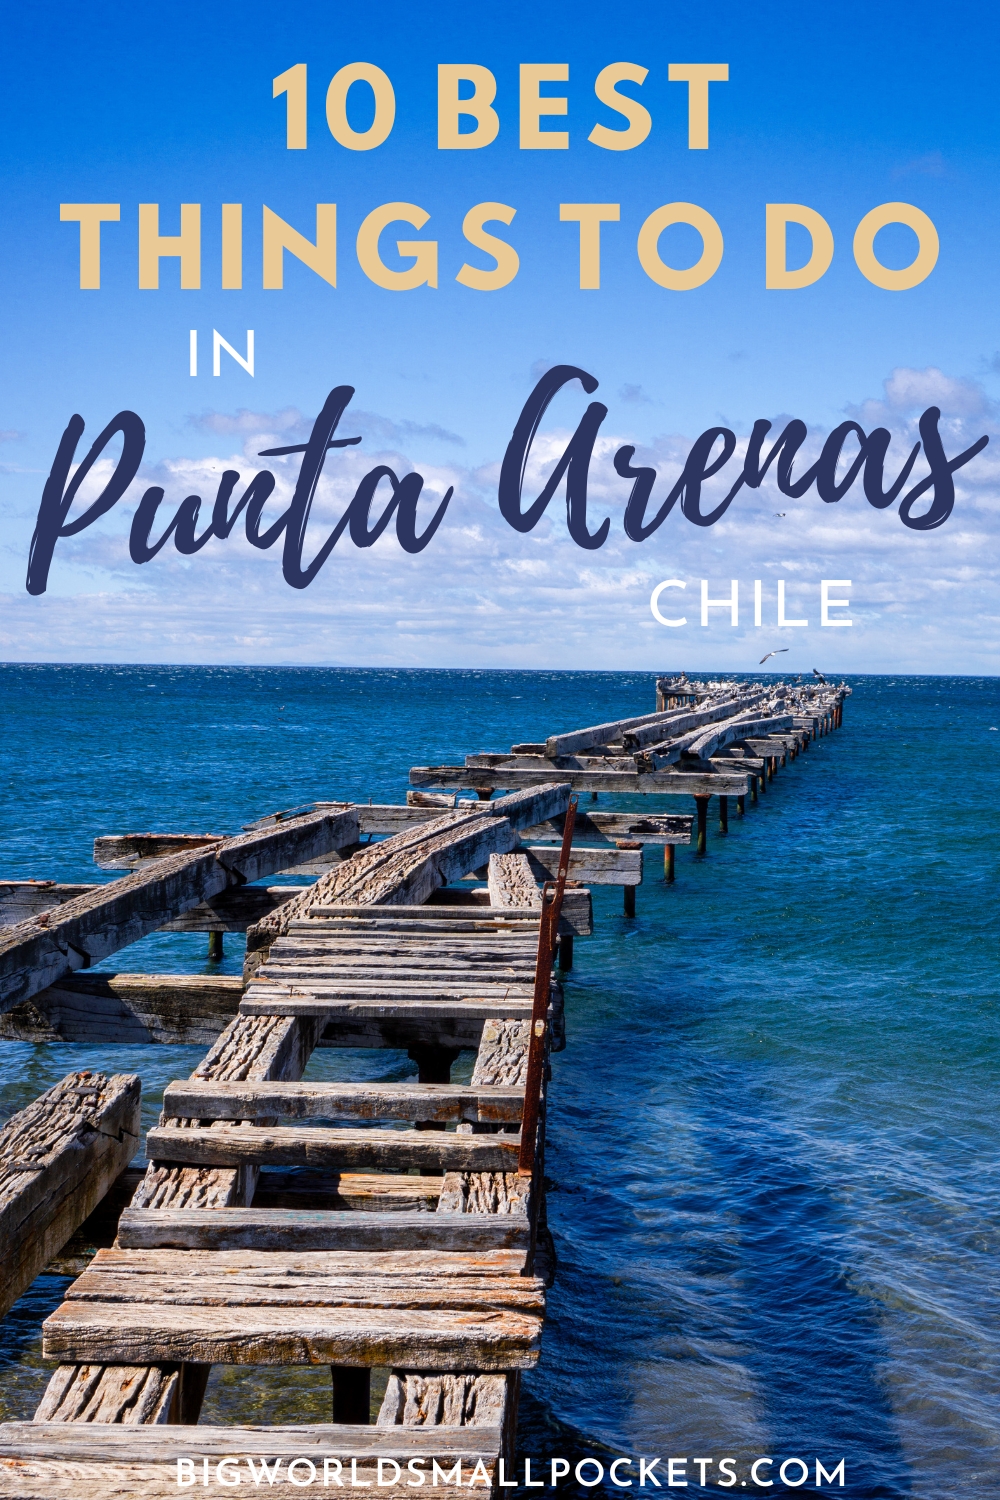 10 Best Things to Do in Punta Arenas, Chile